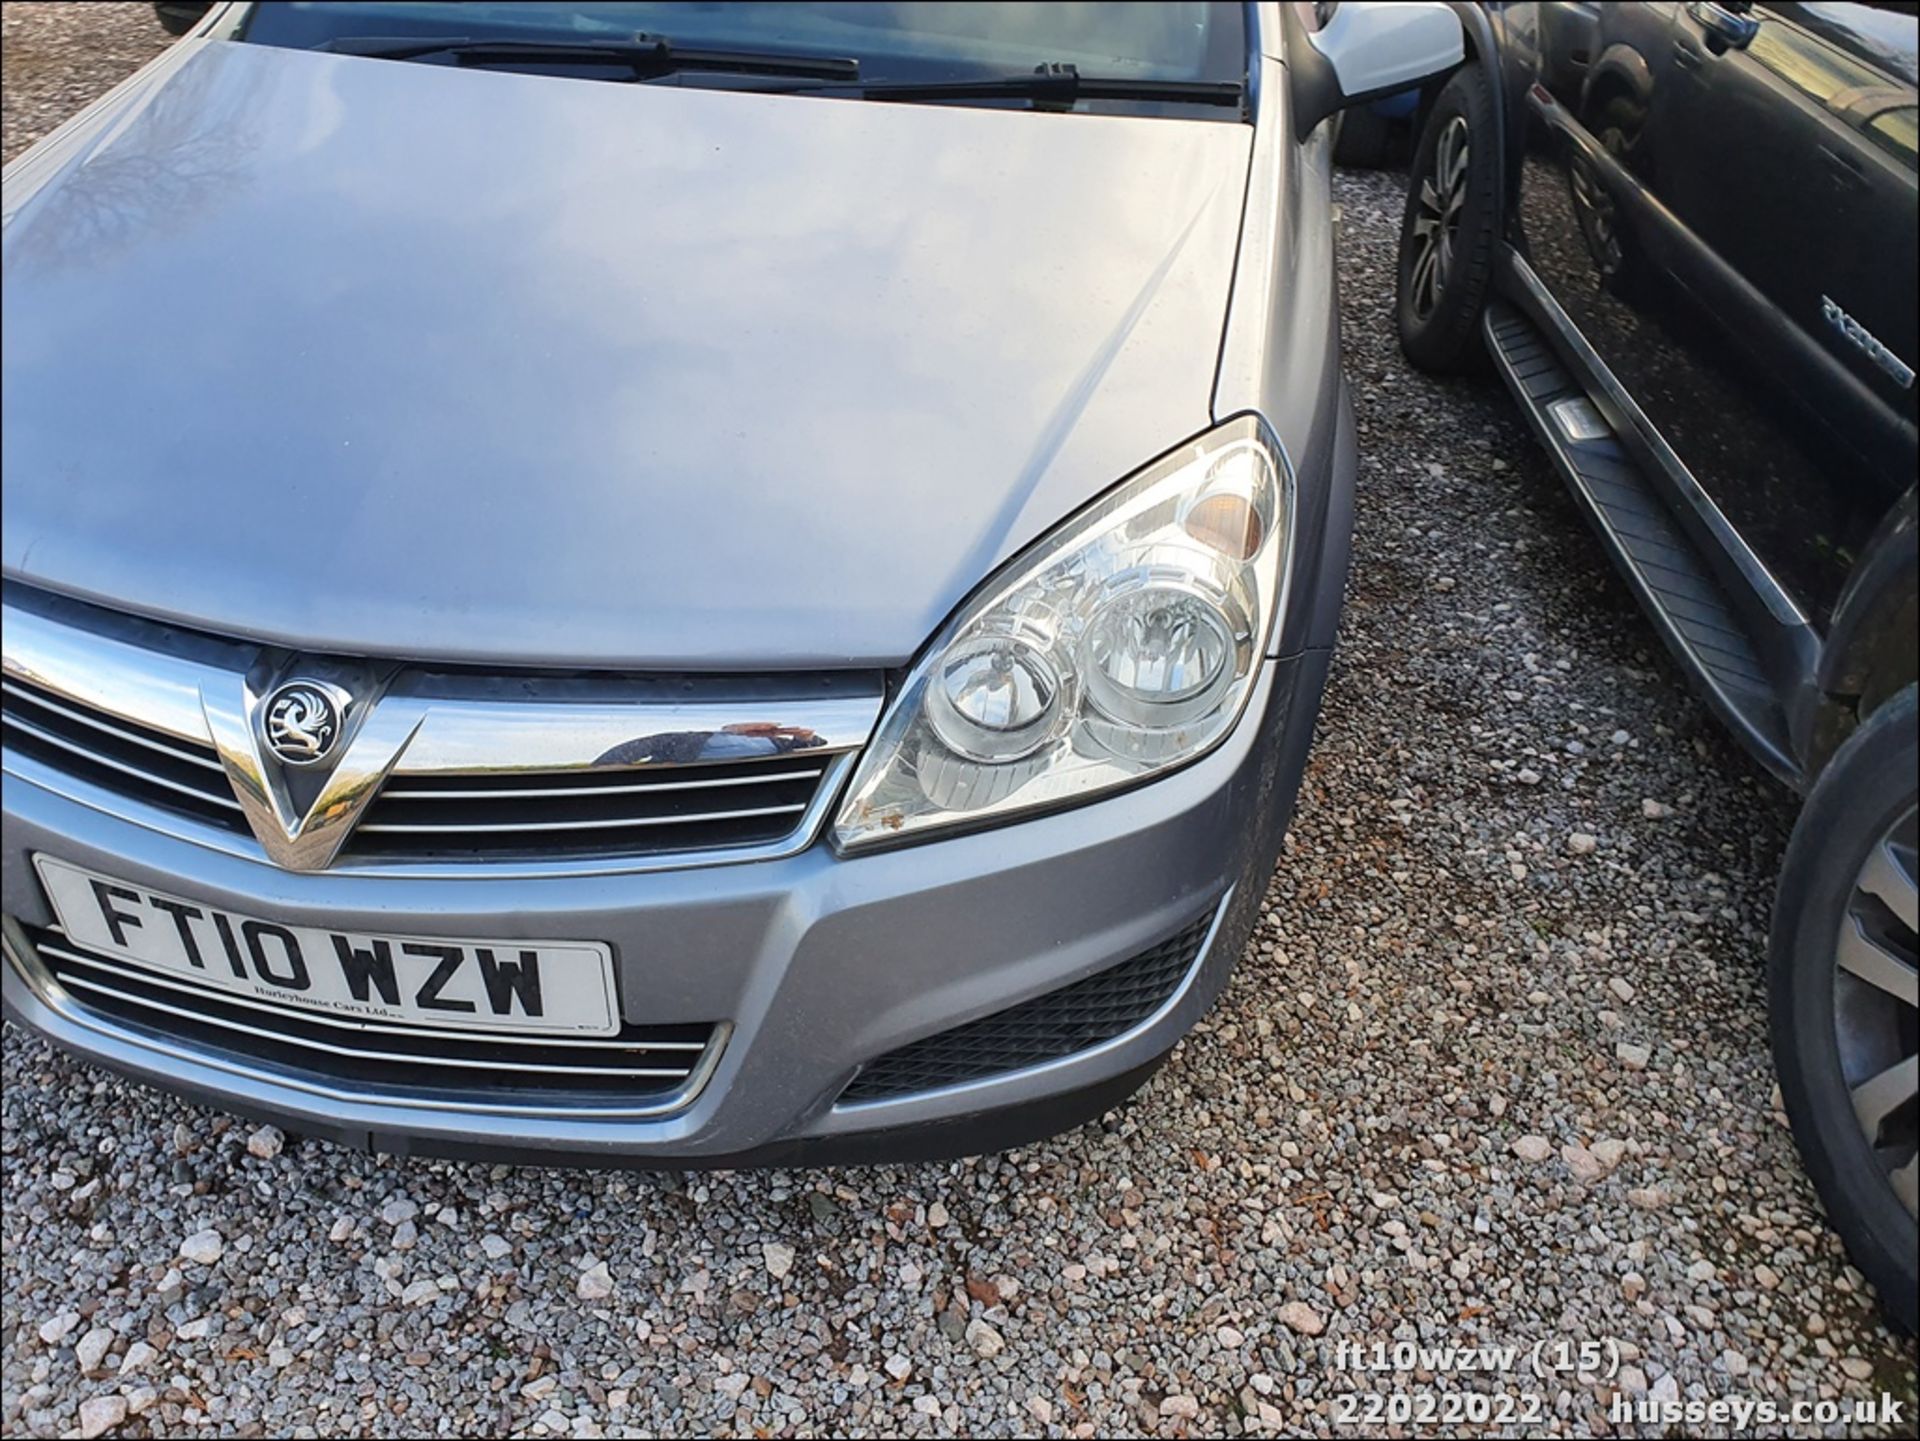 10/10 VAUXHALL ASTRA CLUB - 1364cc 5dr Hatchback (Silver) - Image 16 of 29